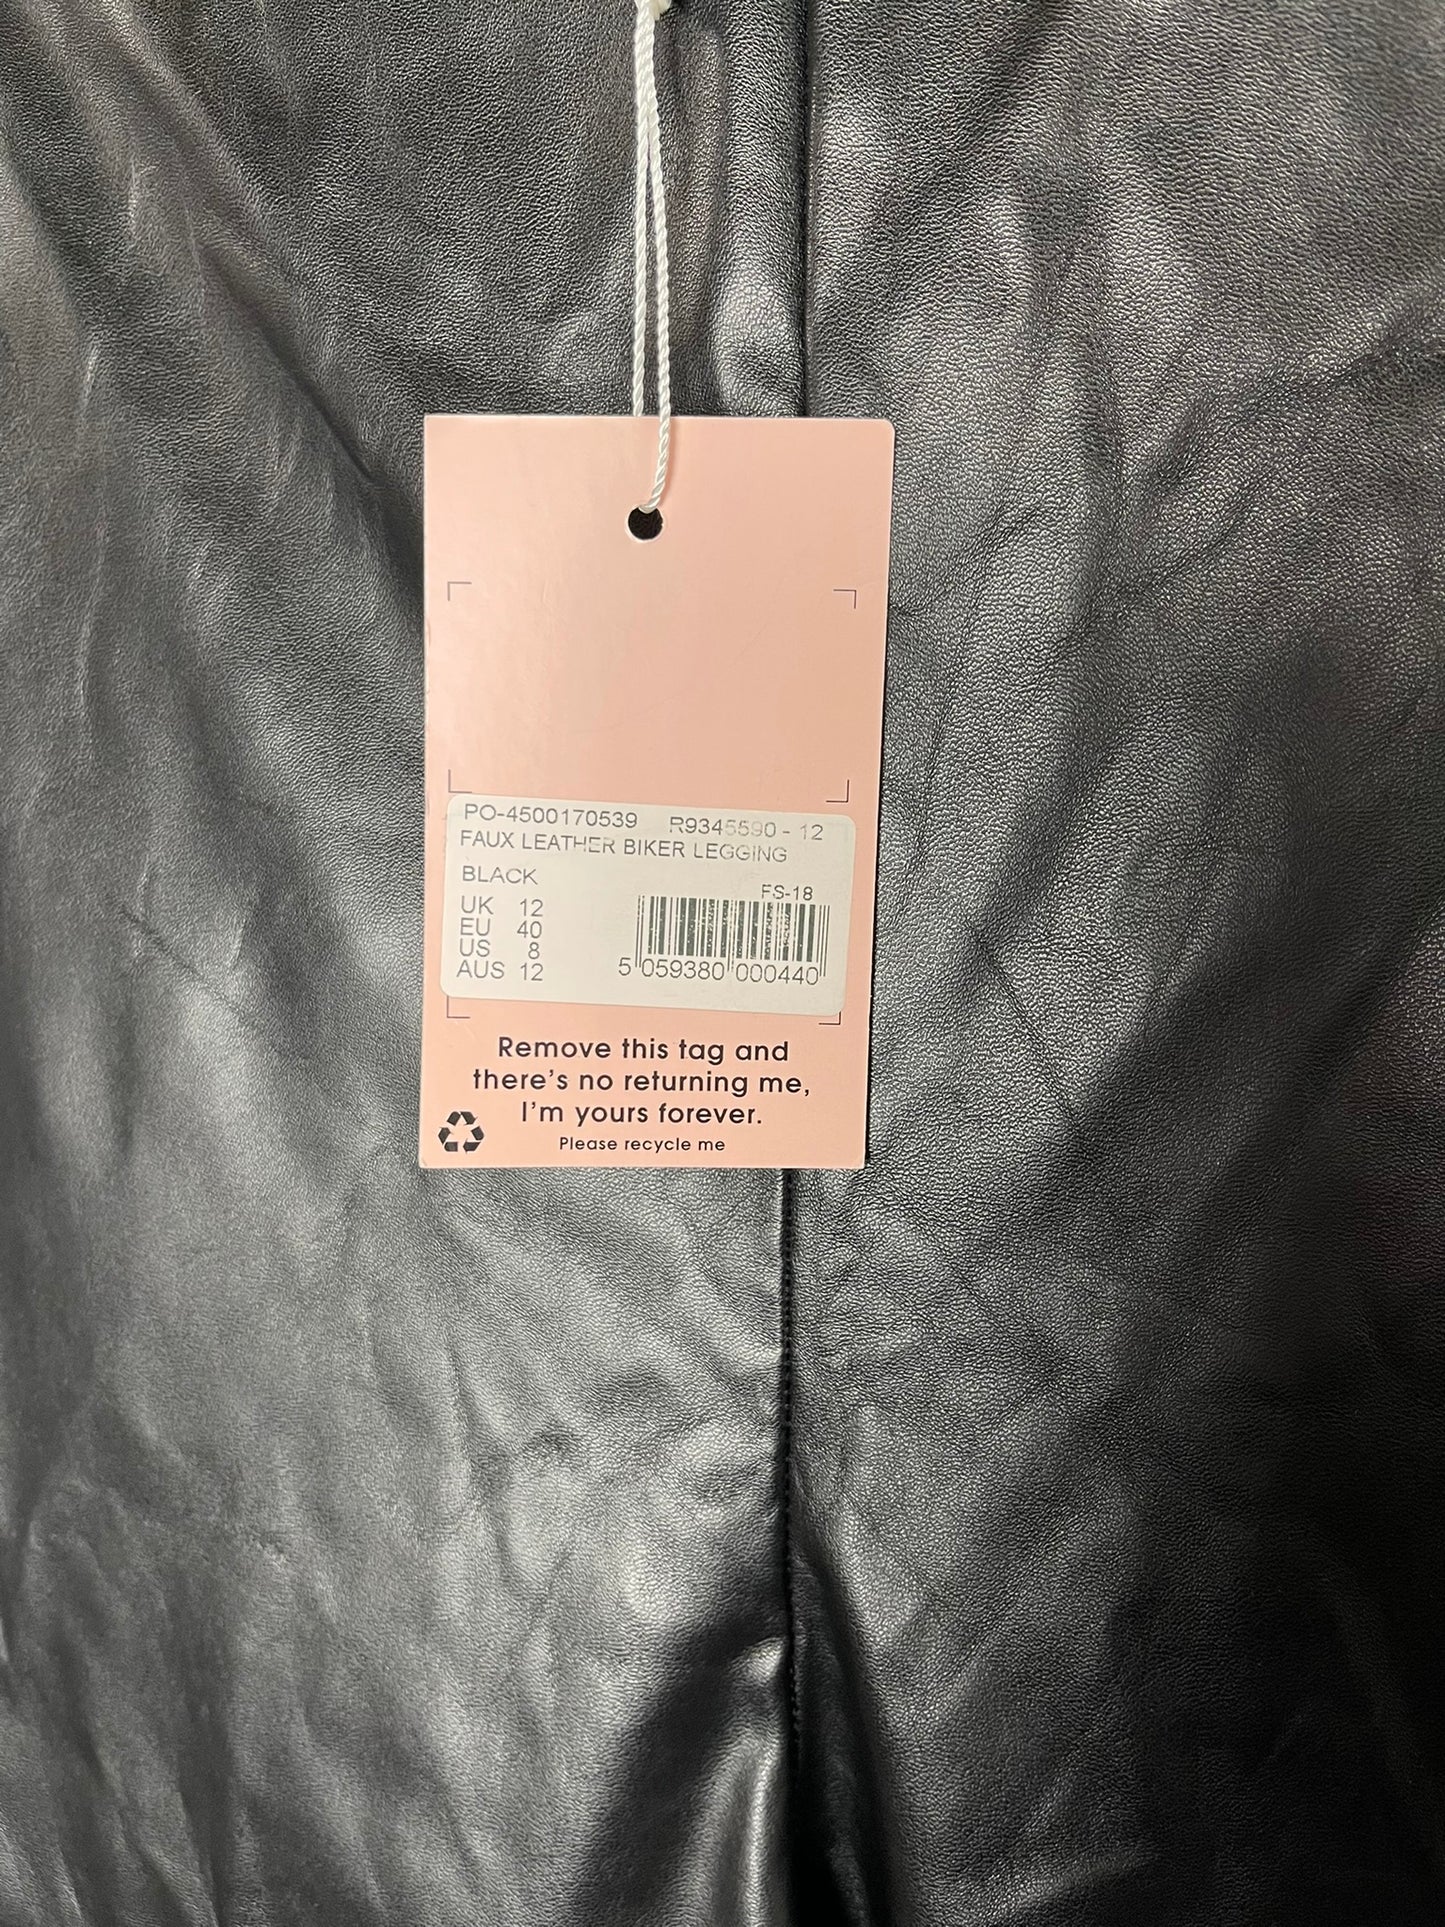 BNWT Missguided Black Faux Leather Leggings Size 12